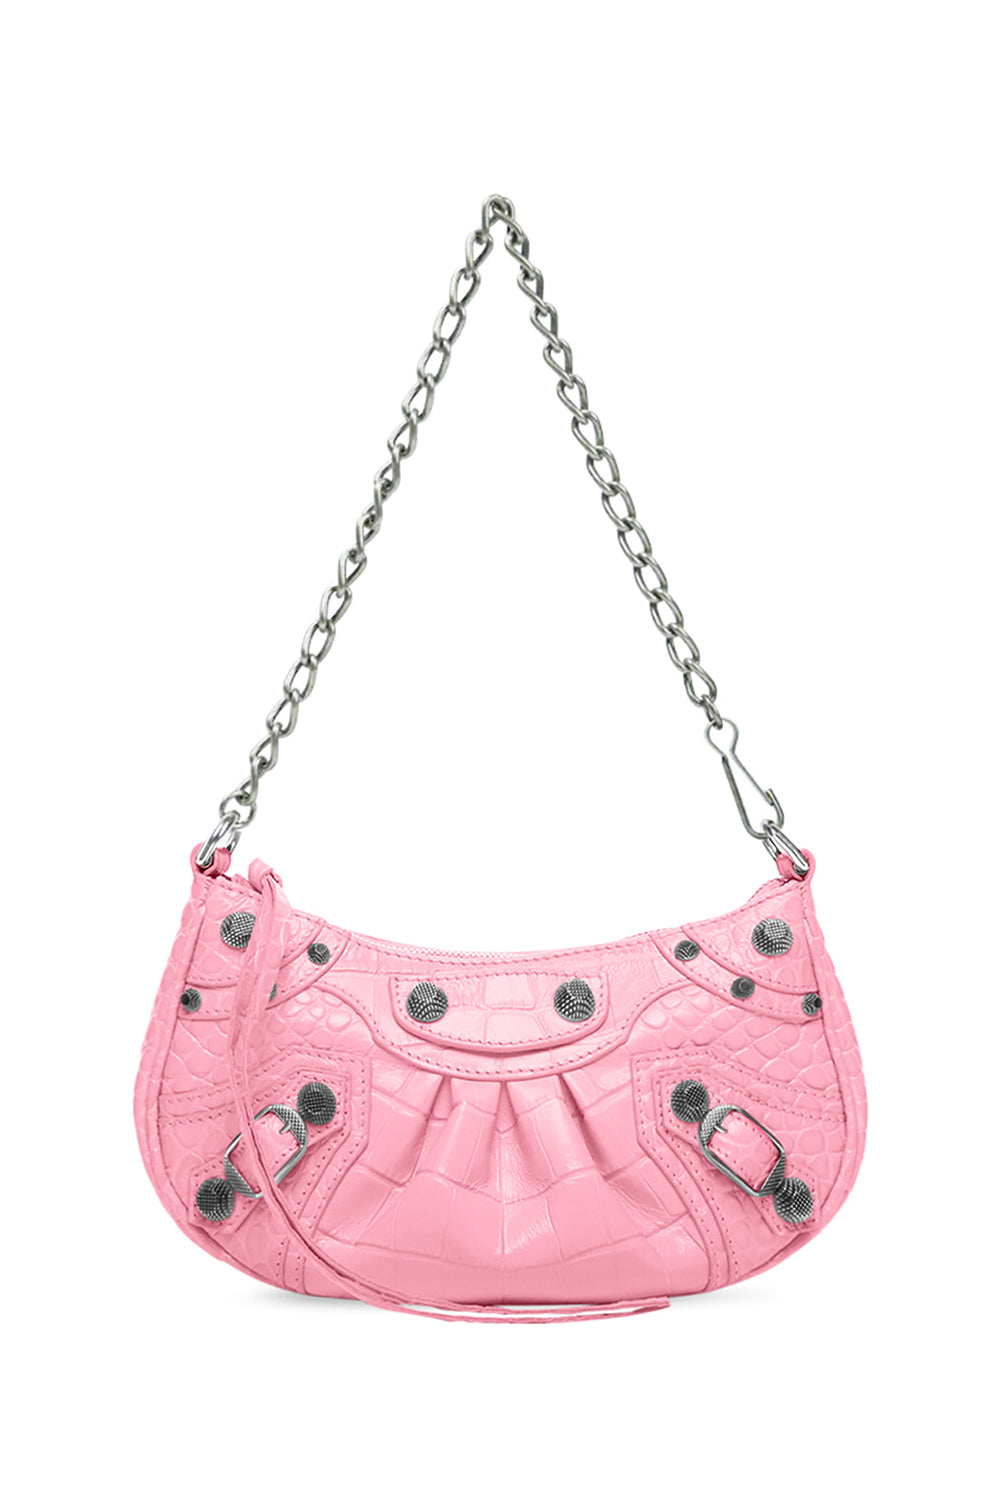 BALENCIAGA Bags PINK LE CAGOLE MINI BAG CROC EMBOSSED | SWEET PINK/SILVER